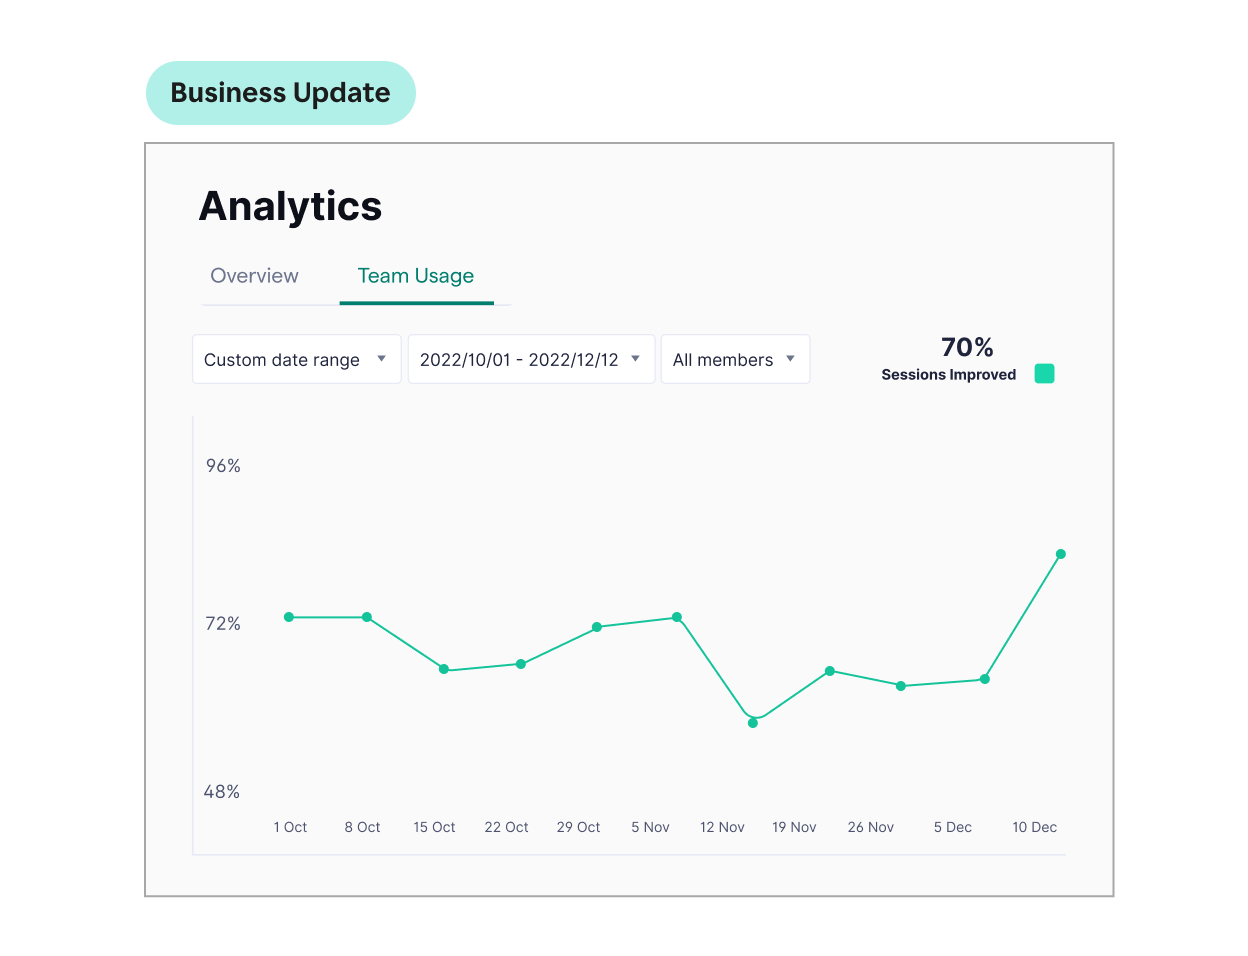 Grammarly allows you to see the analytics for your team usage. 